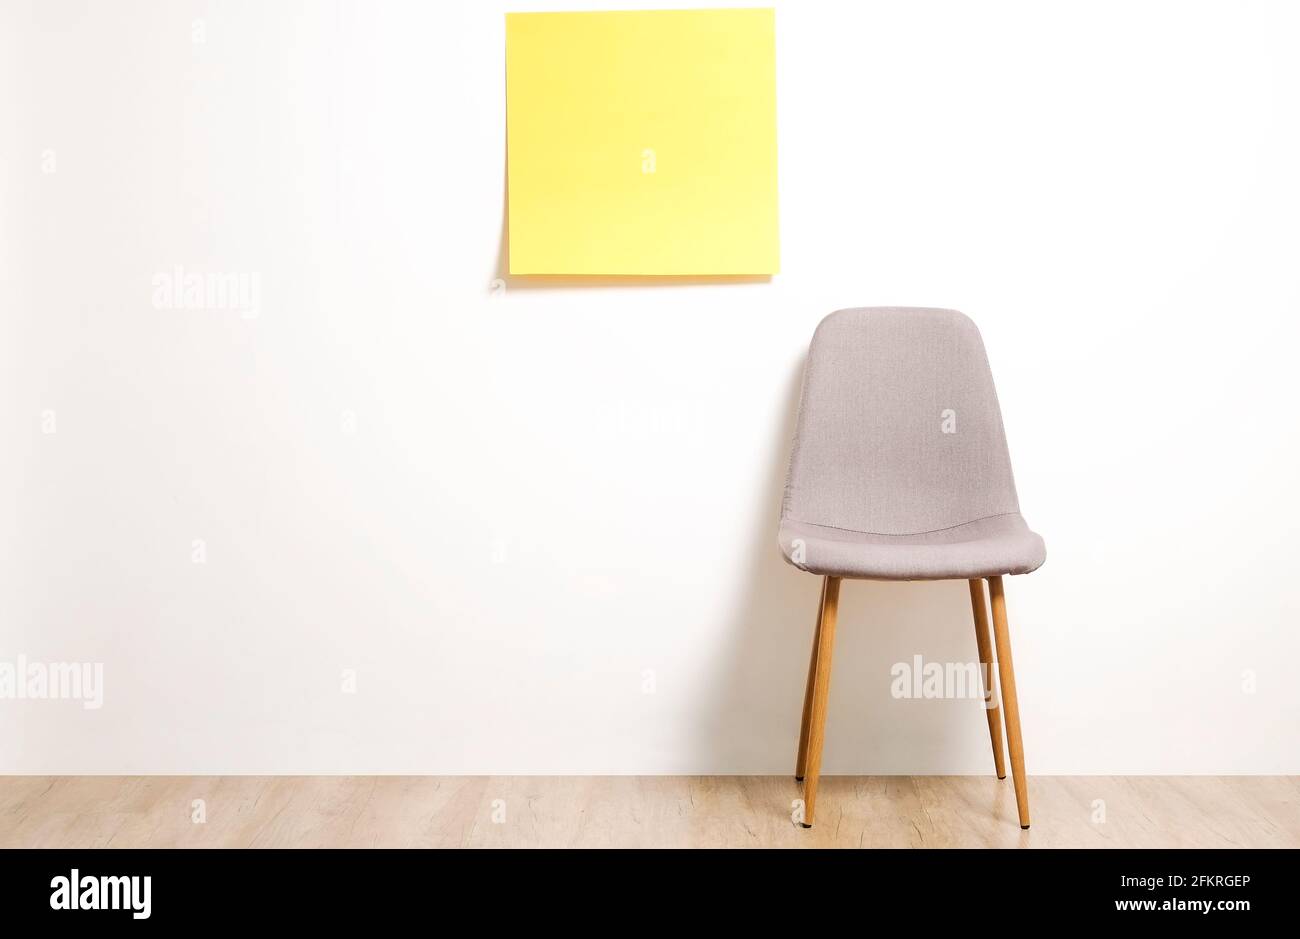 Single empty loft style gray chair on wooden floor, blank ad poster and white wall background, yellow sticker with copy space for your text. Interview Stock Photo